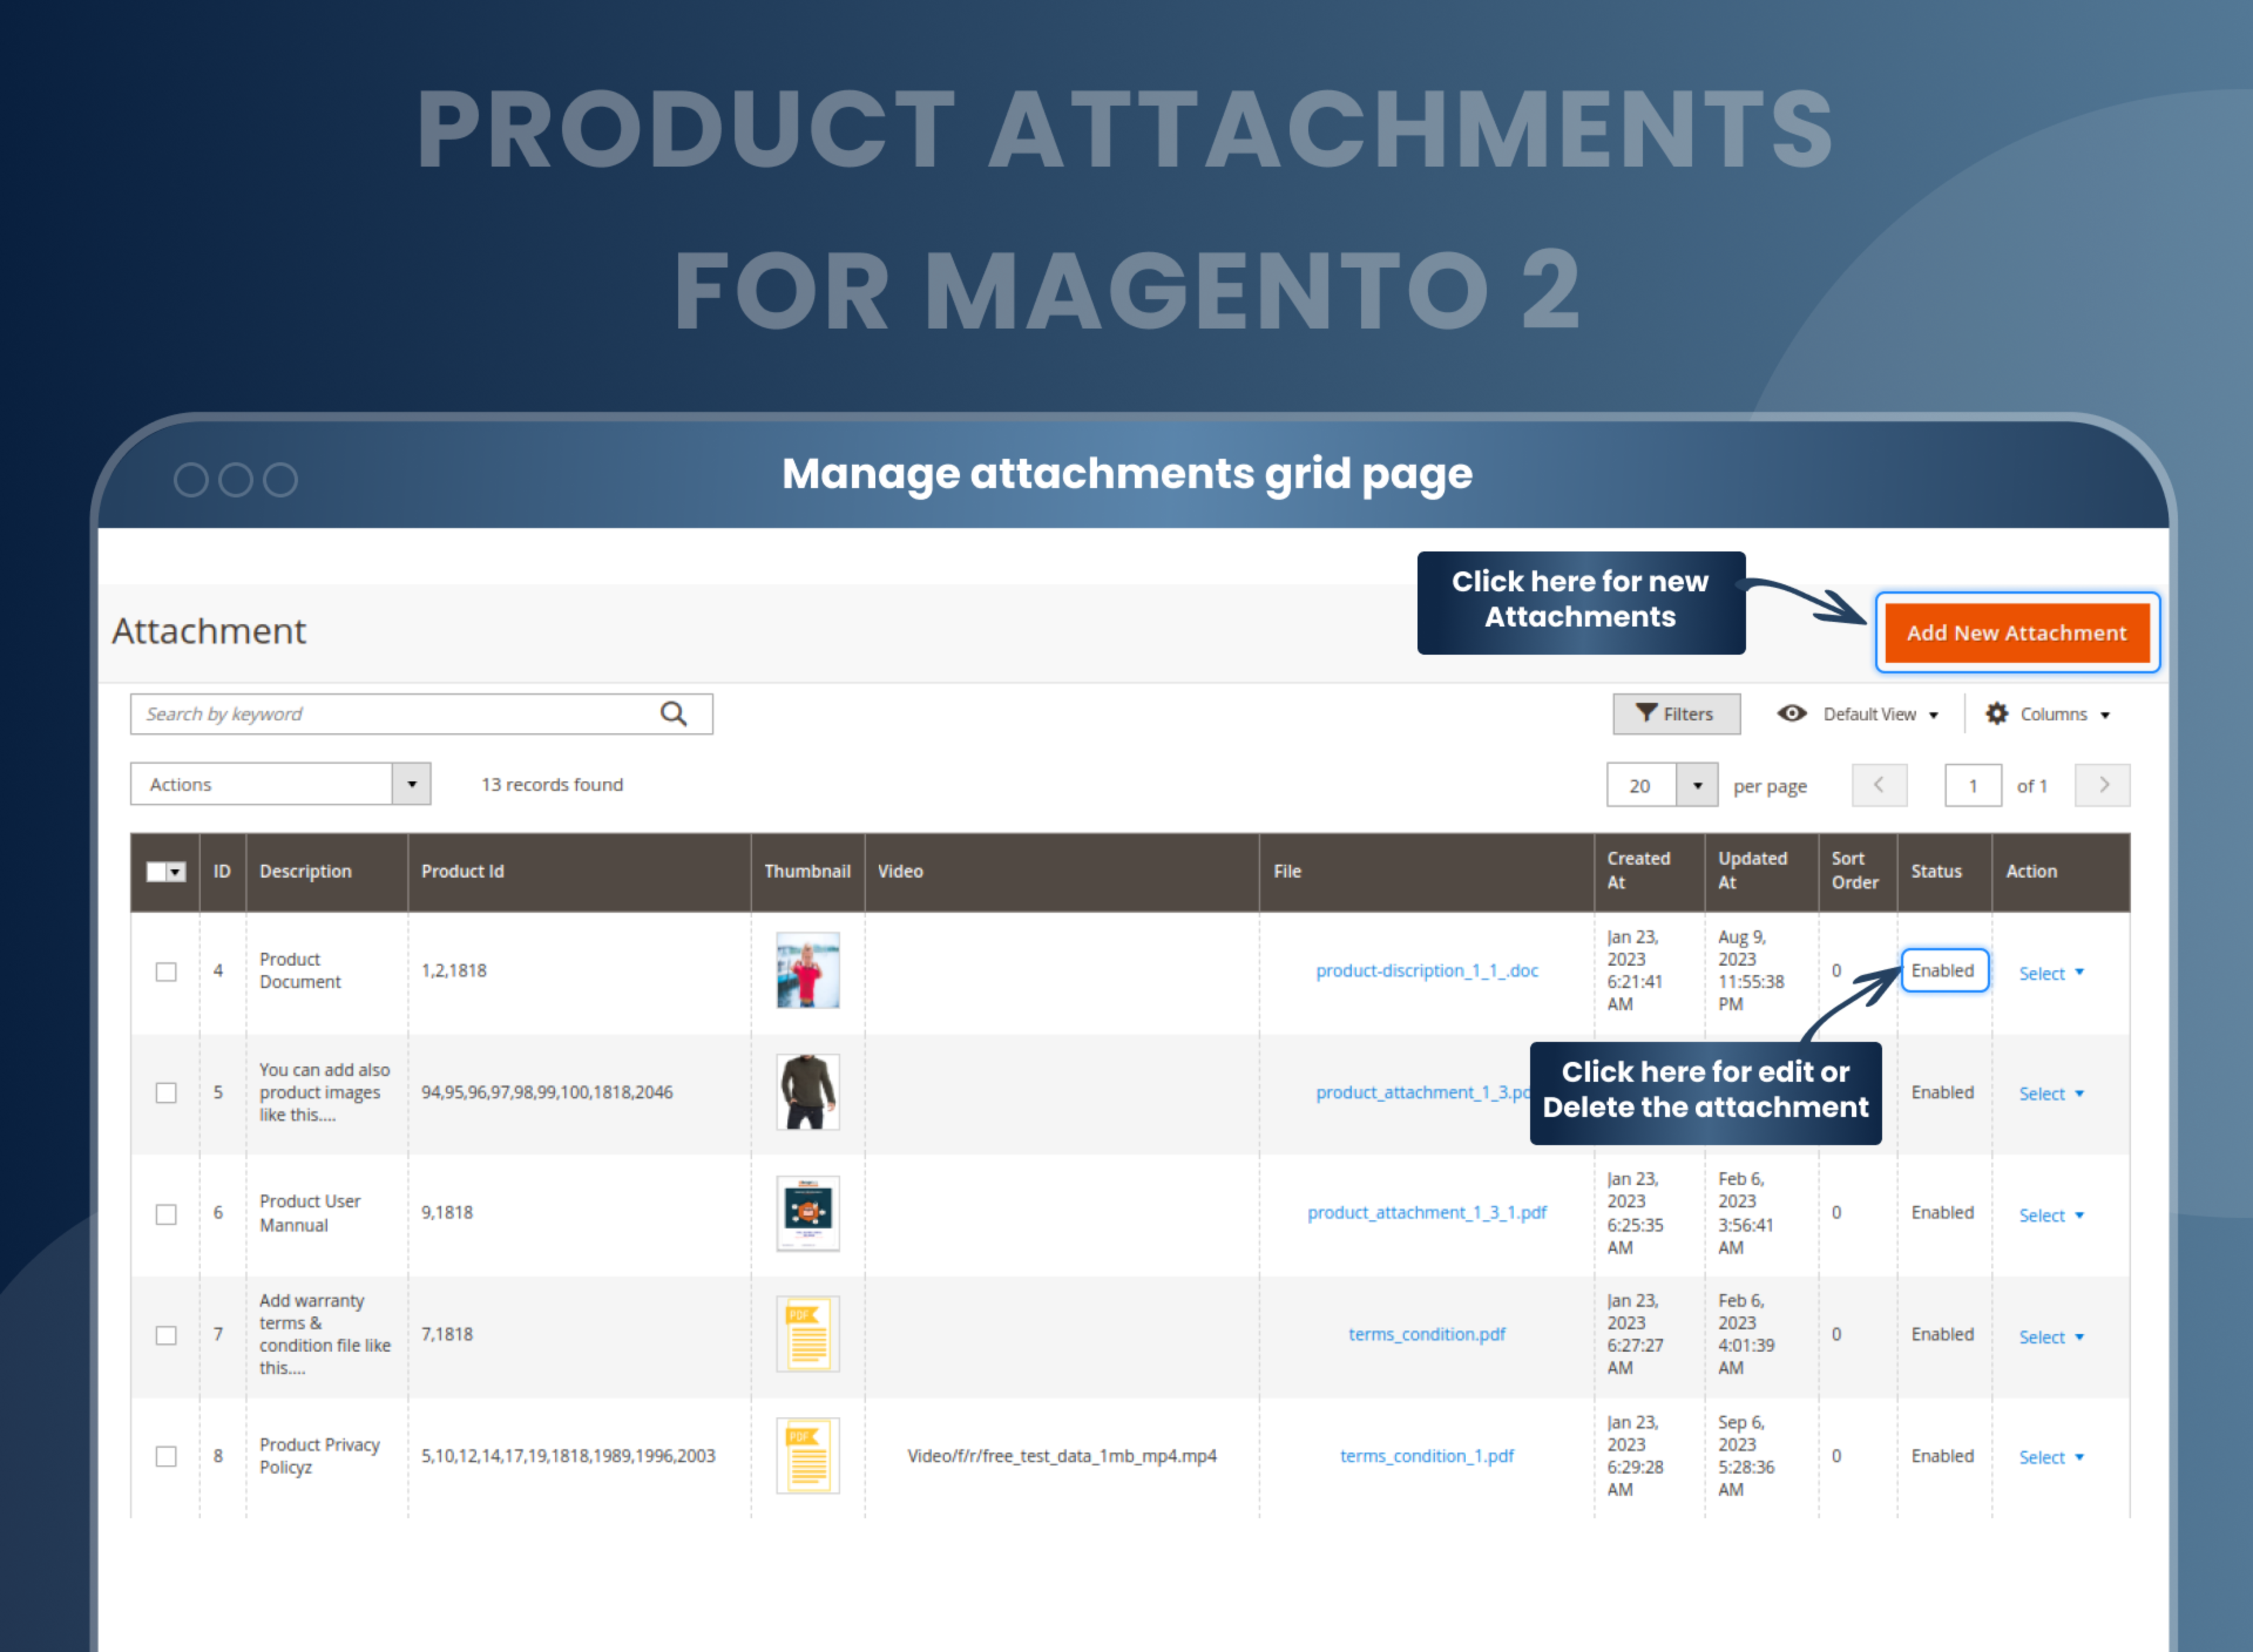 Manage attachments grid page